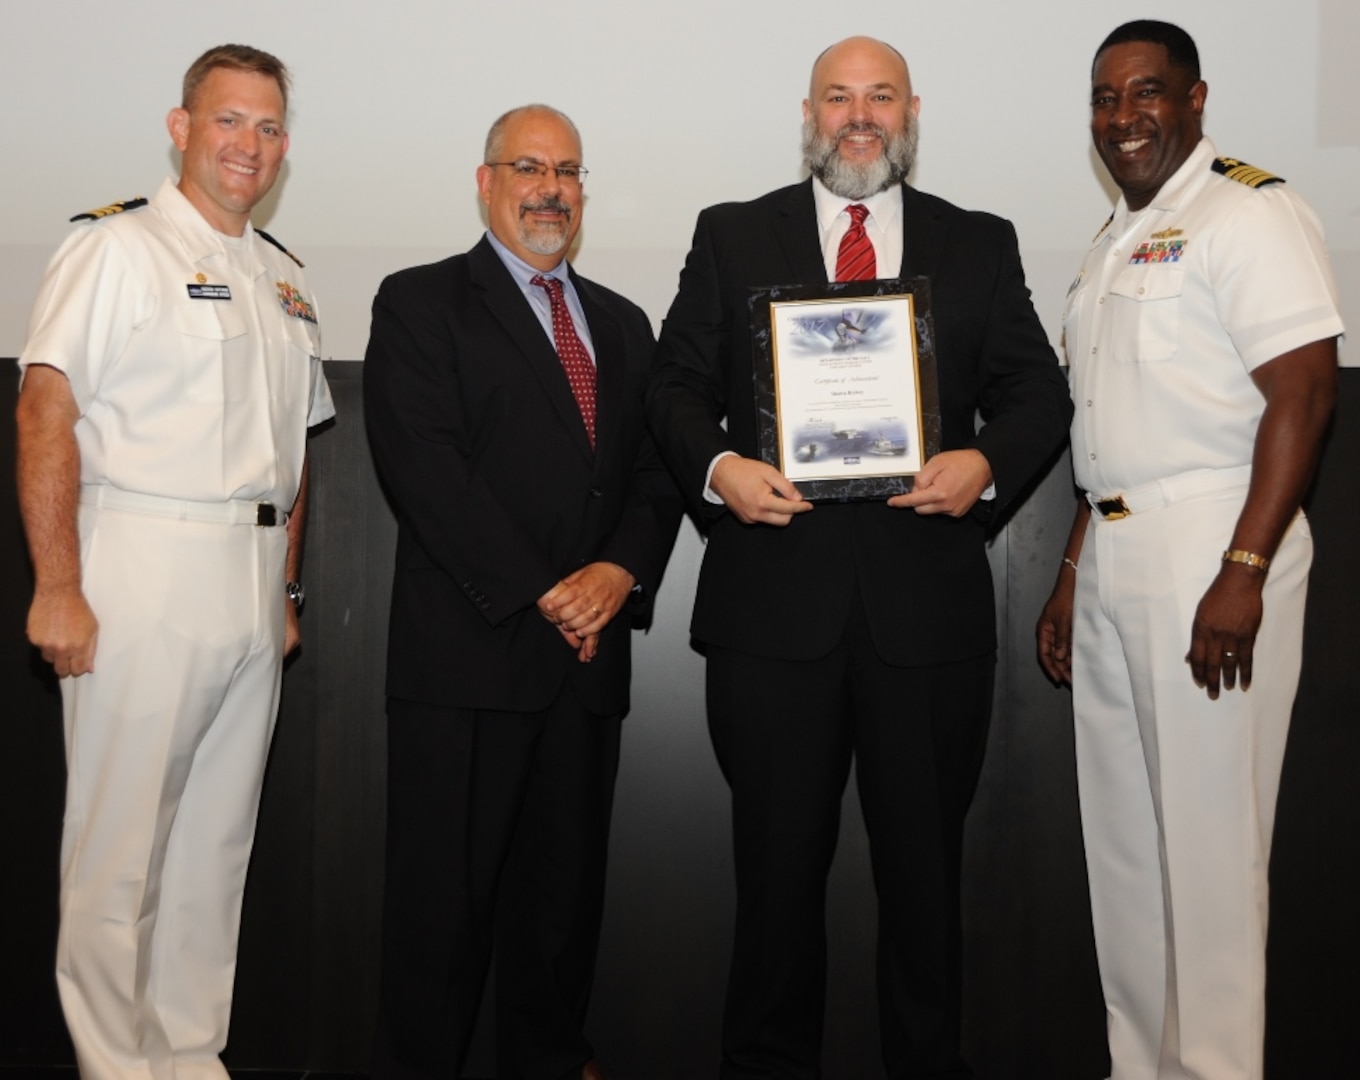 IMAGE: DAHLGREN, Va. - Shawn Richey receives his certificate of achievement from Naval Surface Warfare Center Dahlgren Division (NSWCDD) Technical Director John Fiore, NSWCDD Commanding Officer Capt. Godfrey 'Gus' Weekes, right, and Combat Direction Systems Activity Dam Neck Commanding Officer Cmdr. Andrew Hoffman at the 2017 NSWCDD academic awards ceremony. Finnie was recognized for completing his master's in information systems from Strayer University, and commended for his commitment to personal and professional development.